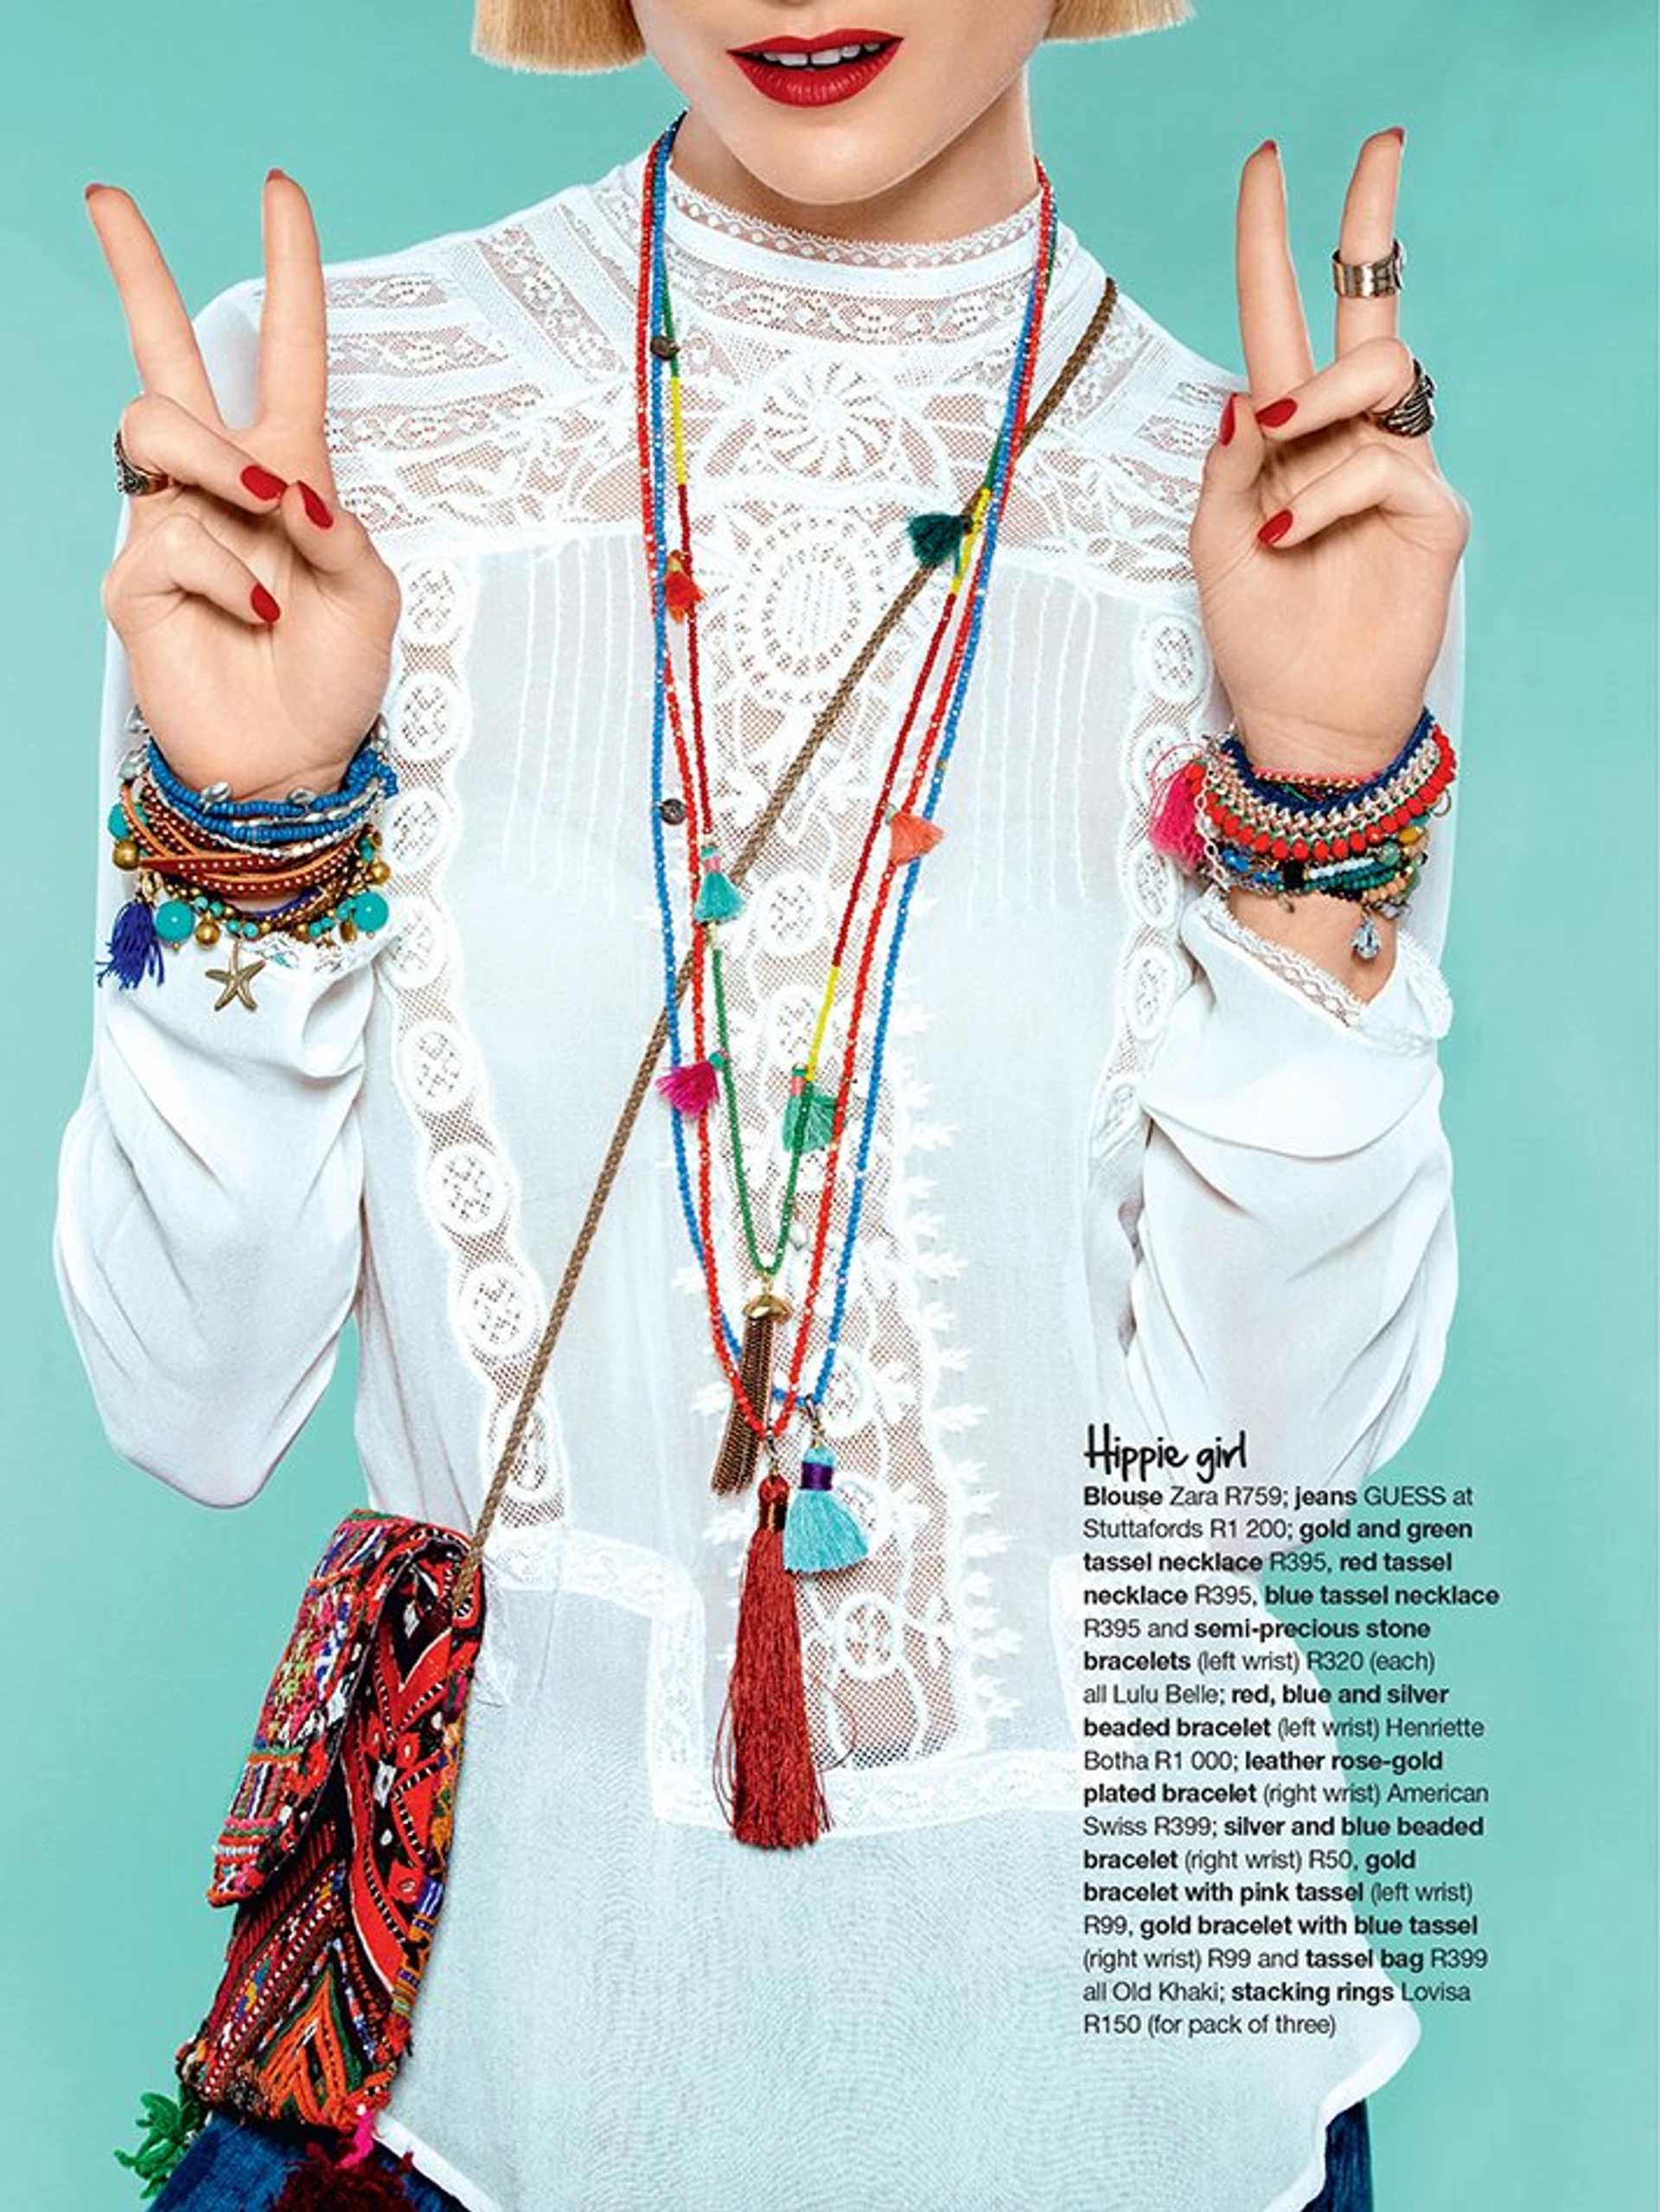 Hippie-inspired woman in a white lace blouse, adorned with multicolored necklaces, bracelets, and a beaded bag. She makes a peace sign with her hand, against a turquoise background.